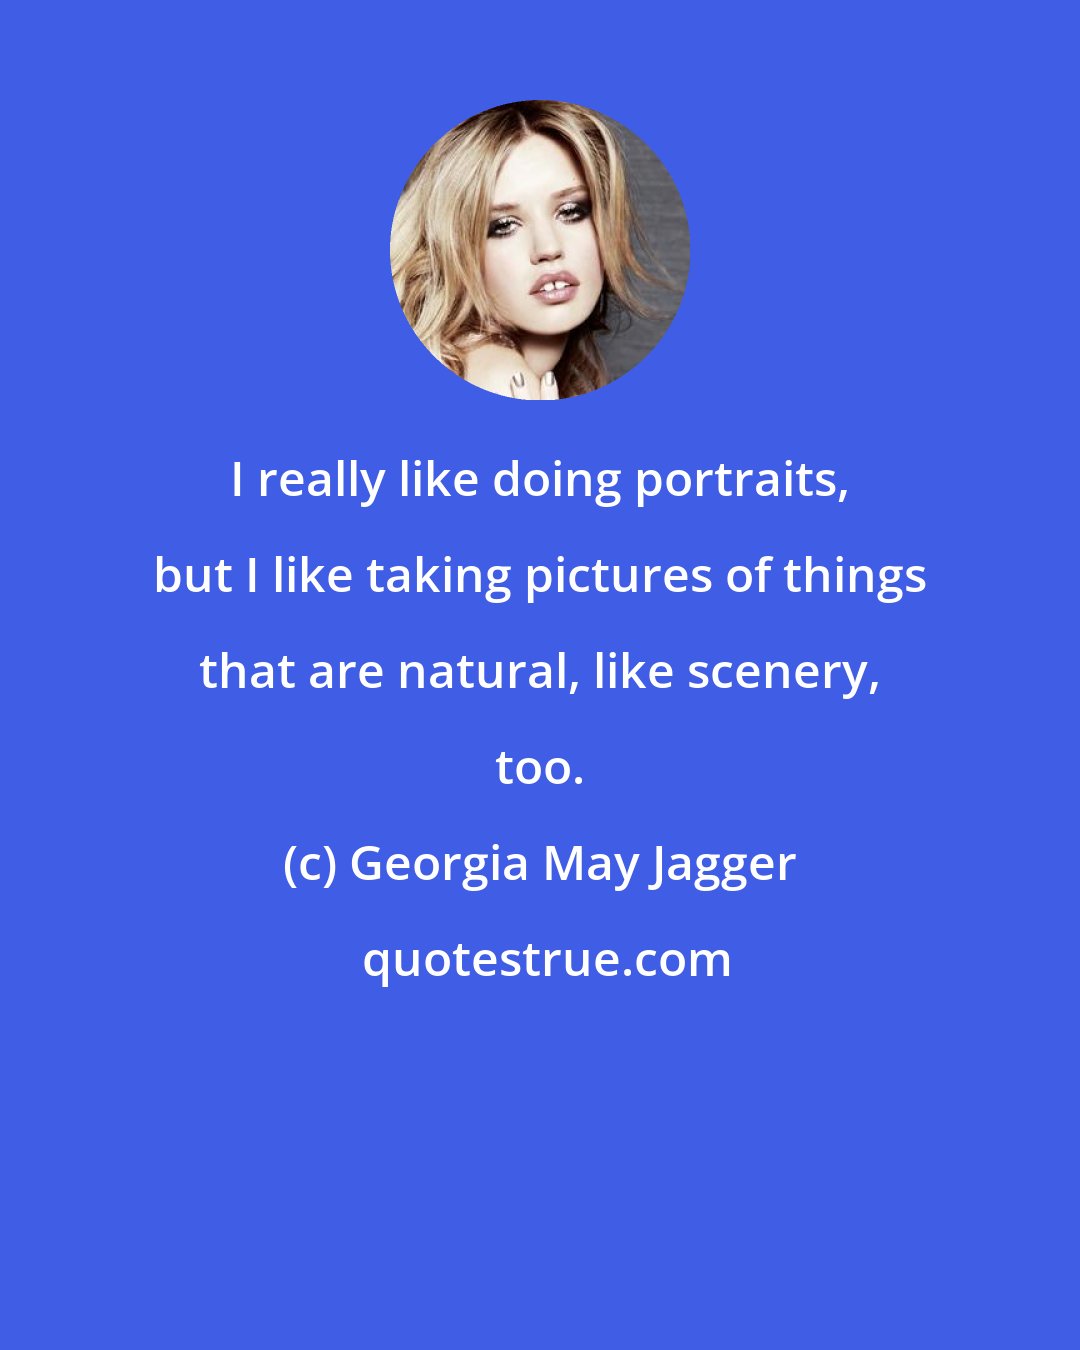 Georgia May Jagger: I really like doing portraits, but I like taking pictures of things that are natural, like scenery, too.